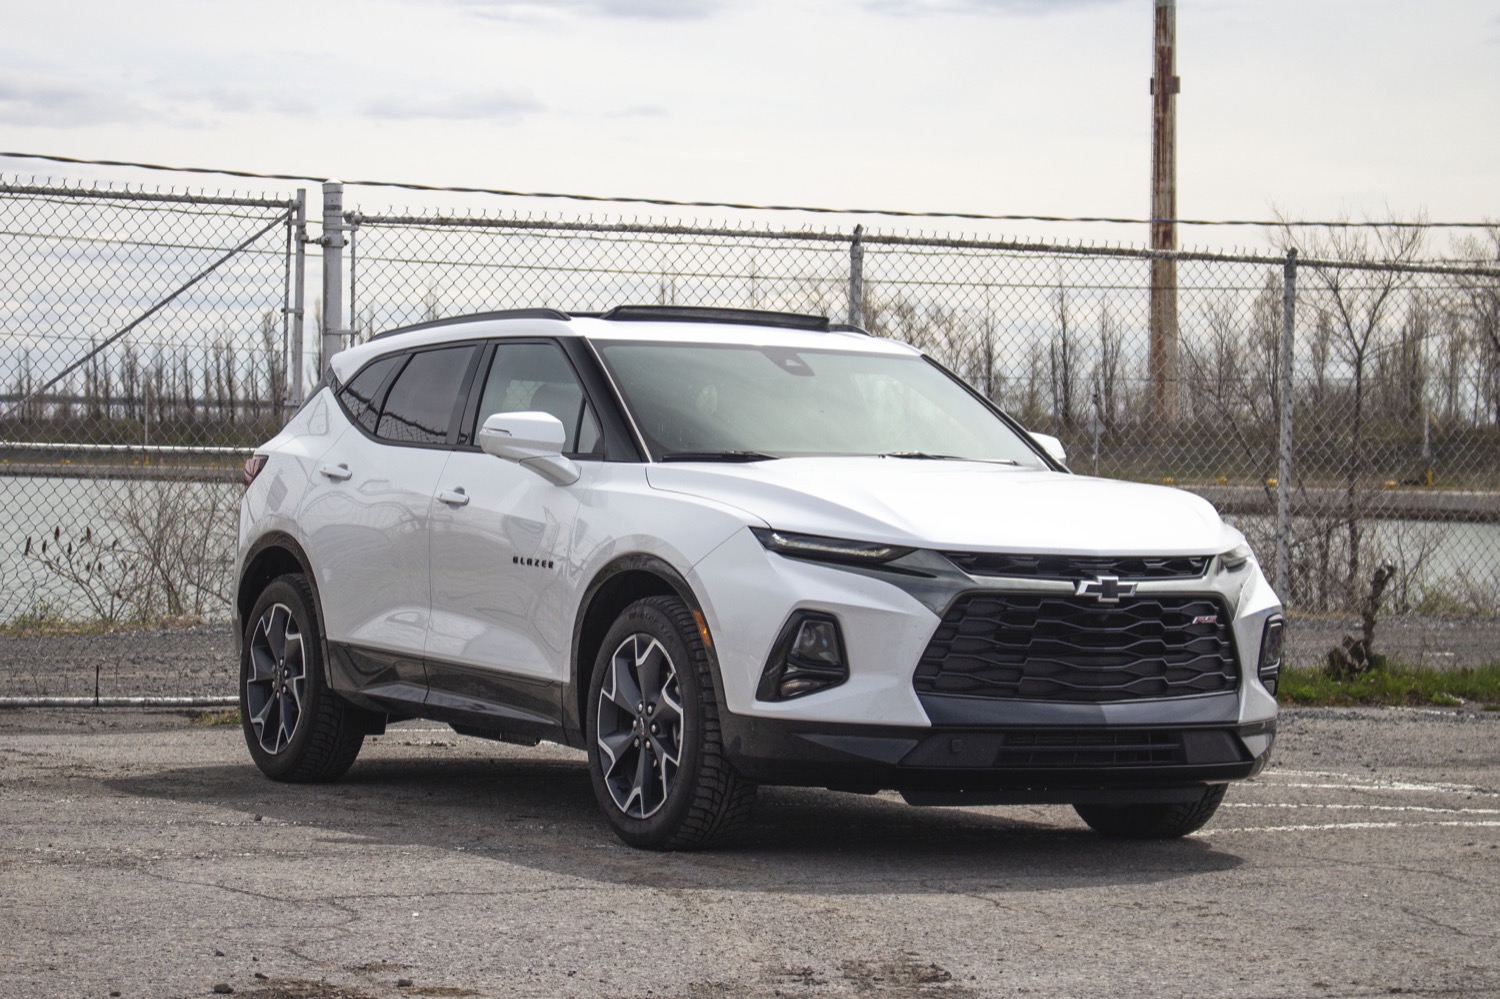 2022 Chevy Blazer: Here's What's New And Different